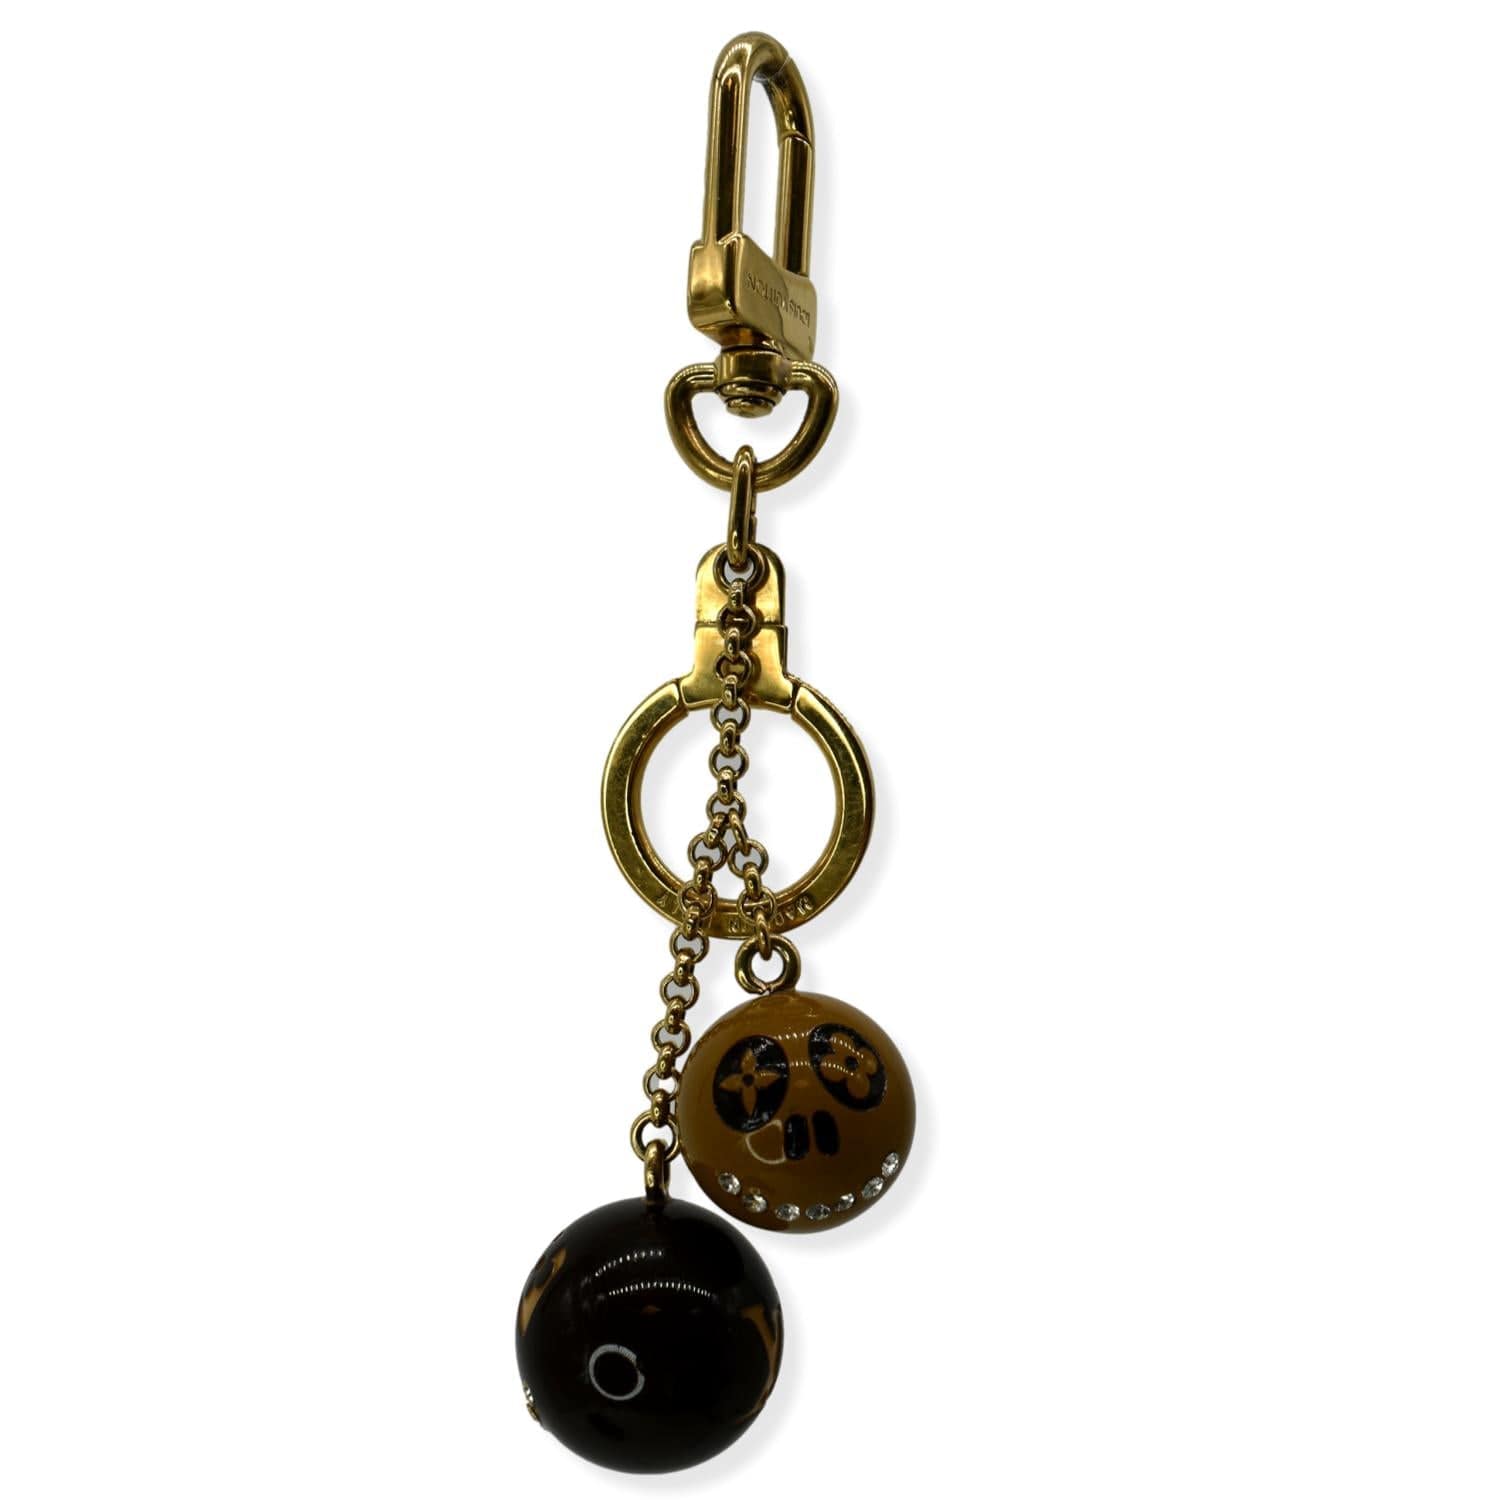 Louis Vuitton Bells and Baubles Bag Charm Keychain Bag Charm - SOLD